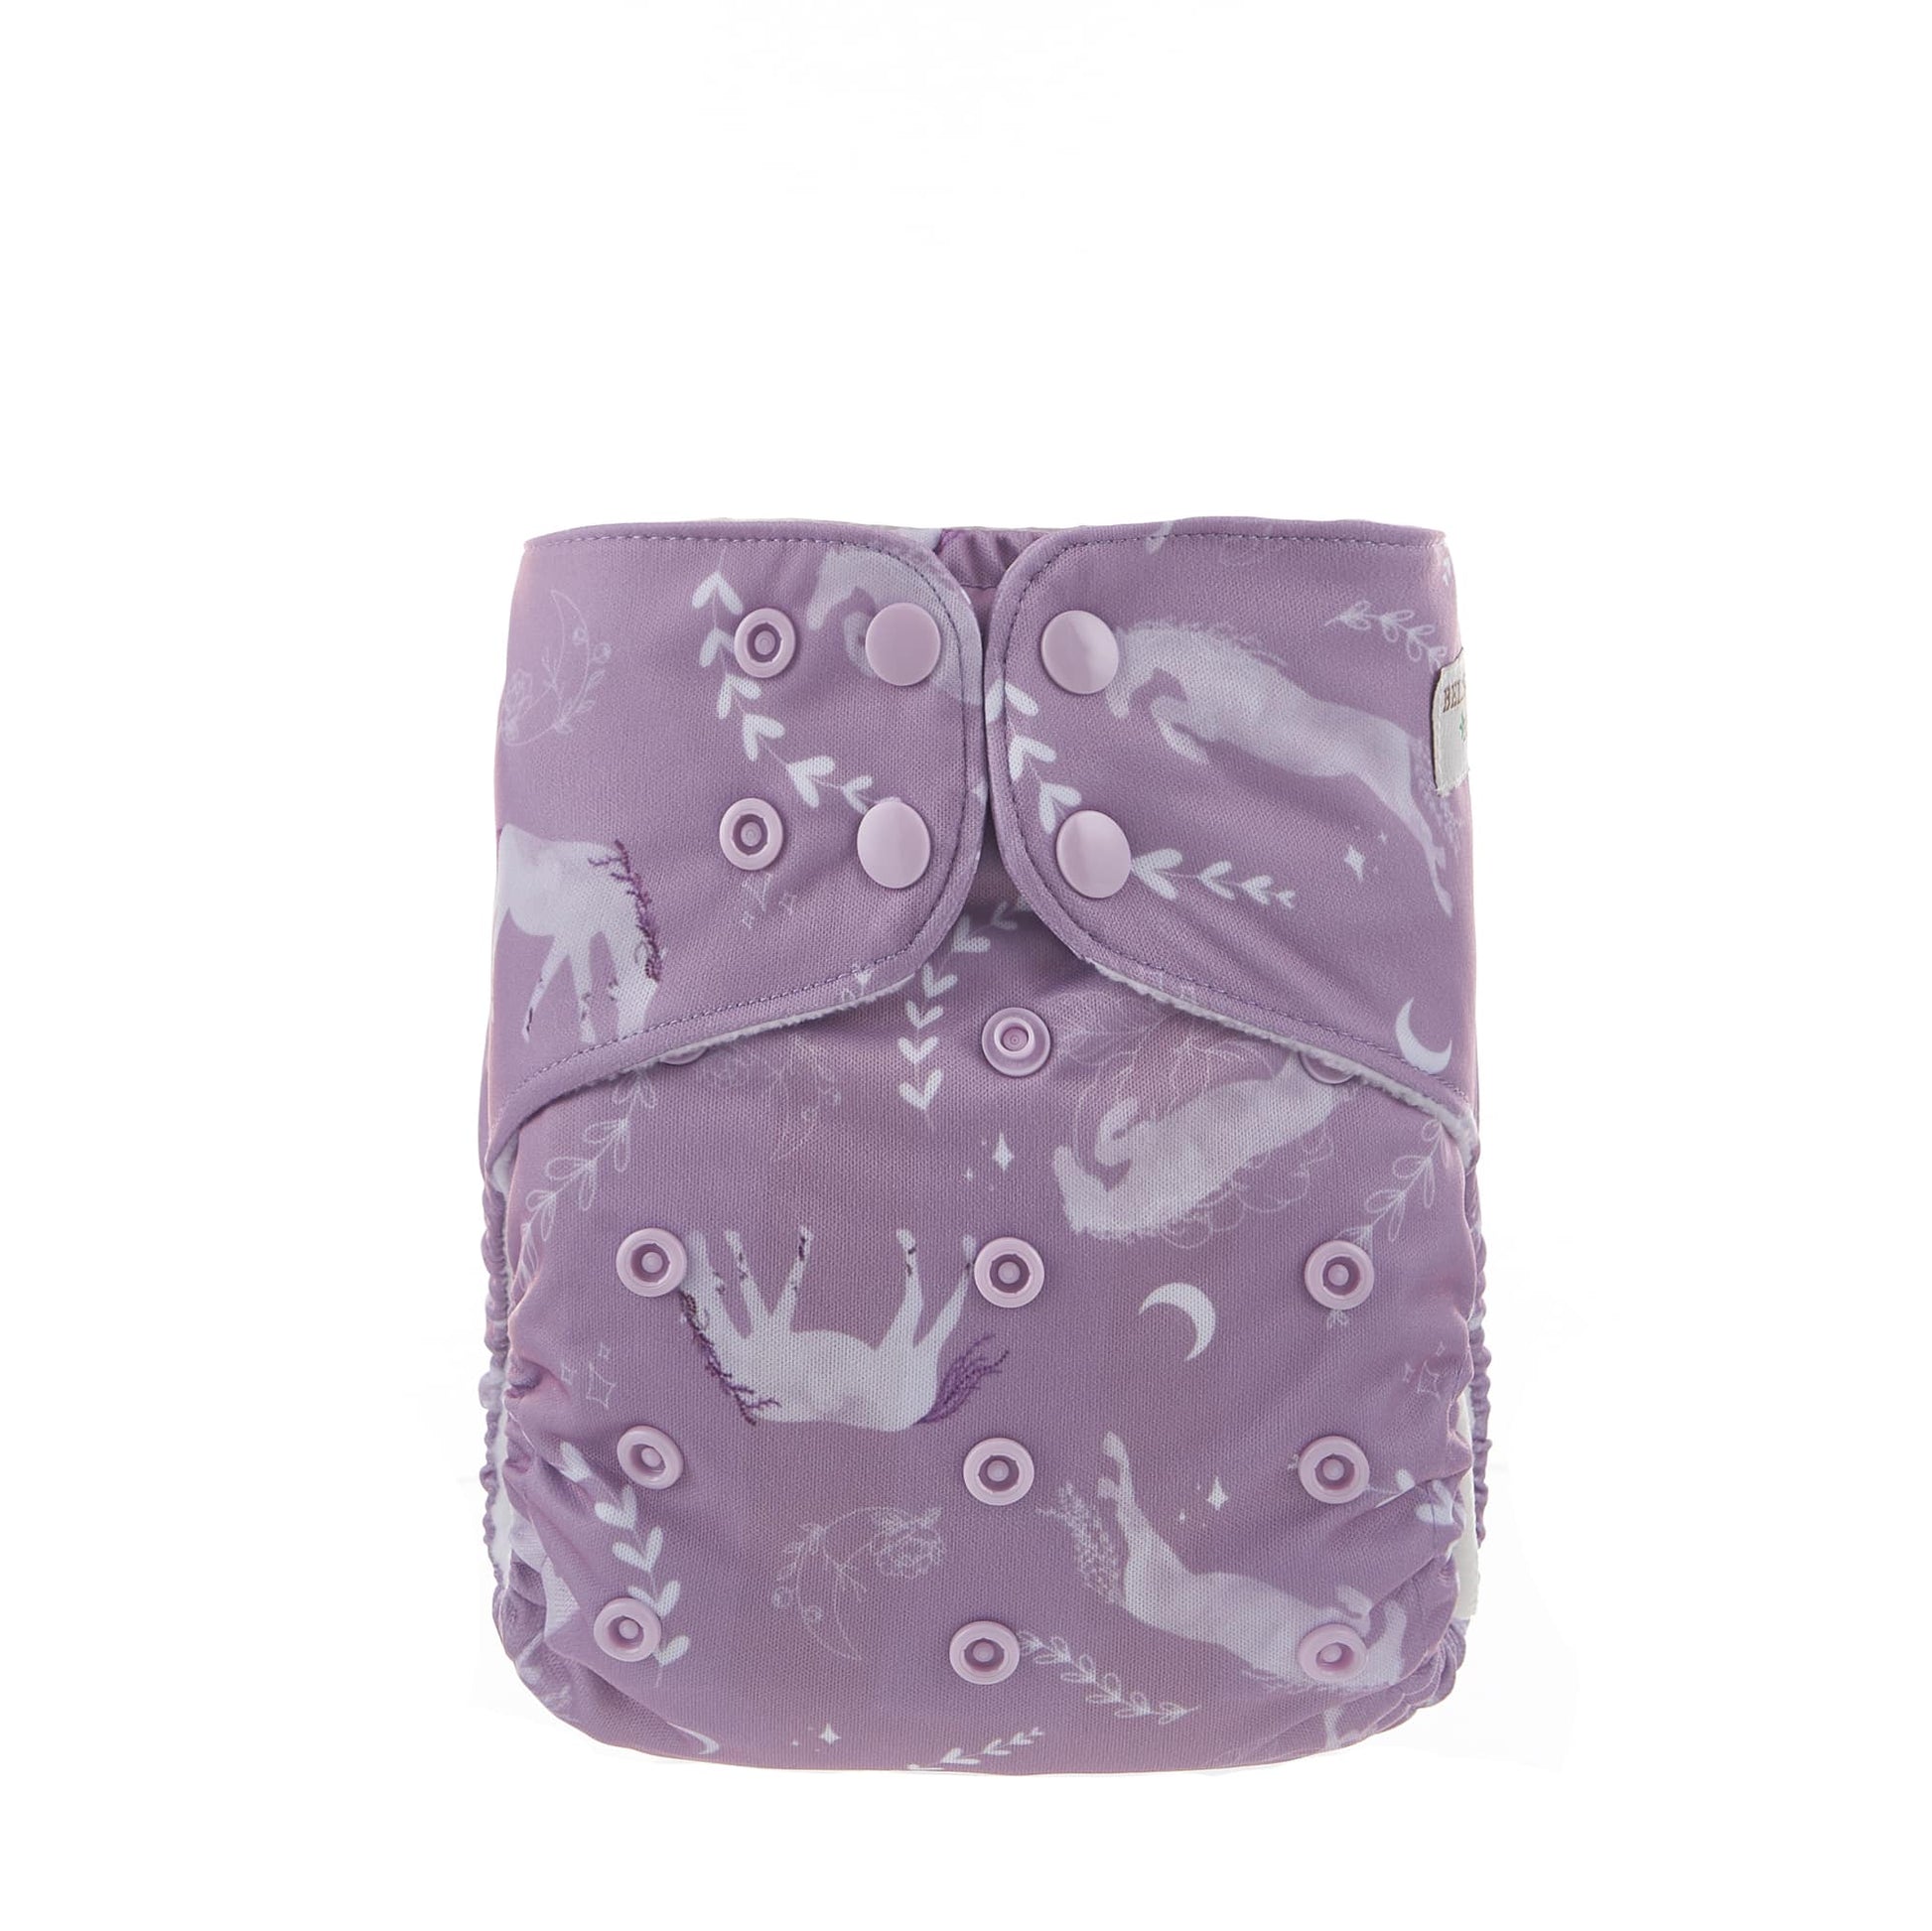 Reusable cloth nappy with a pink horse print.